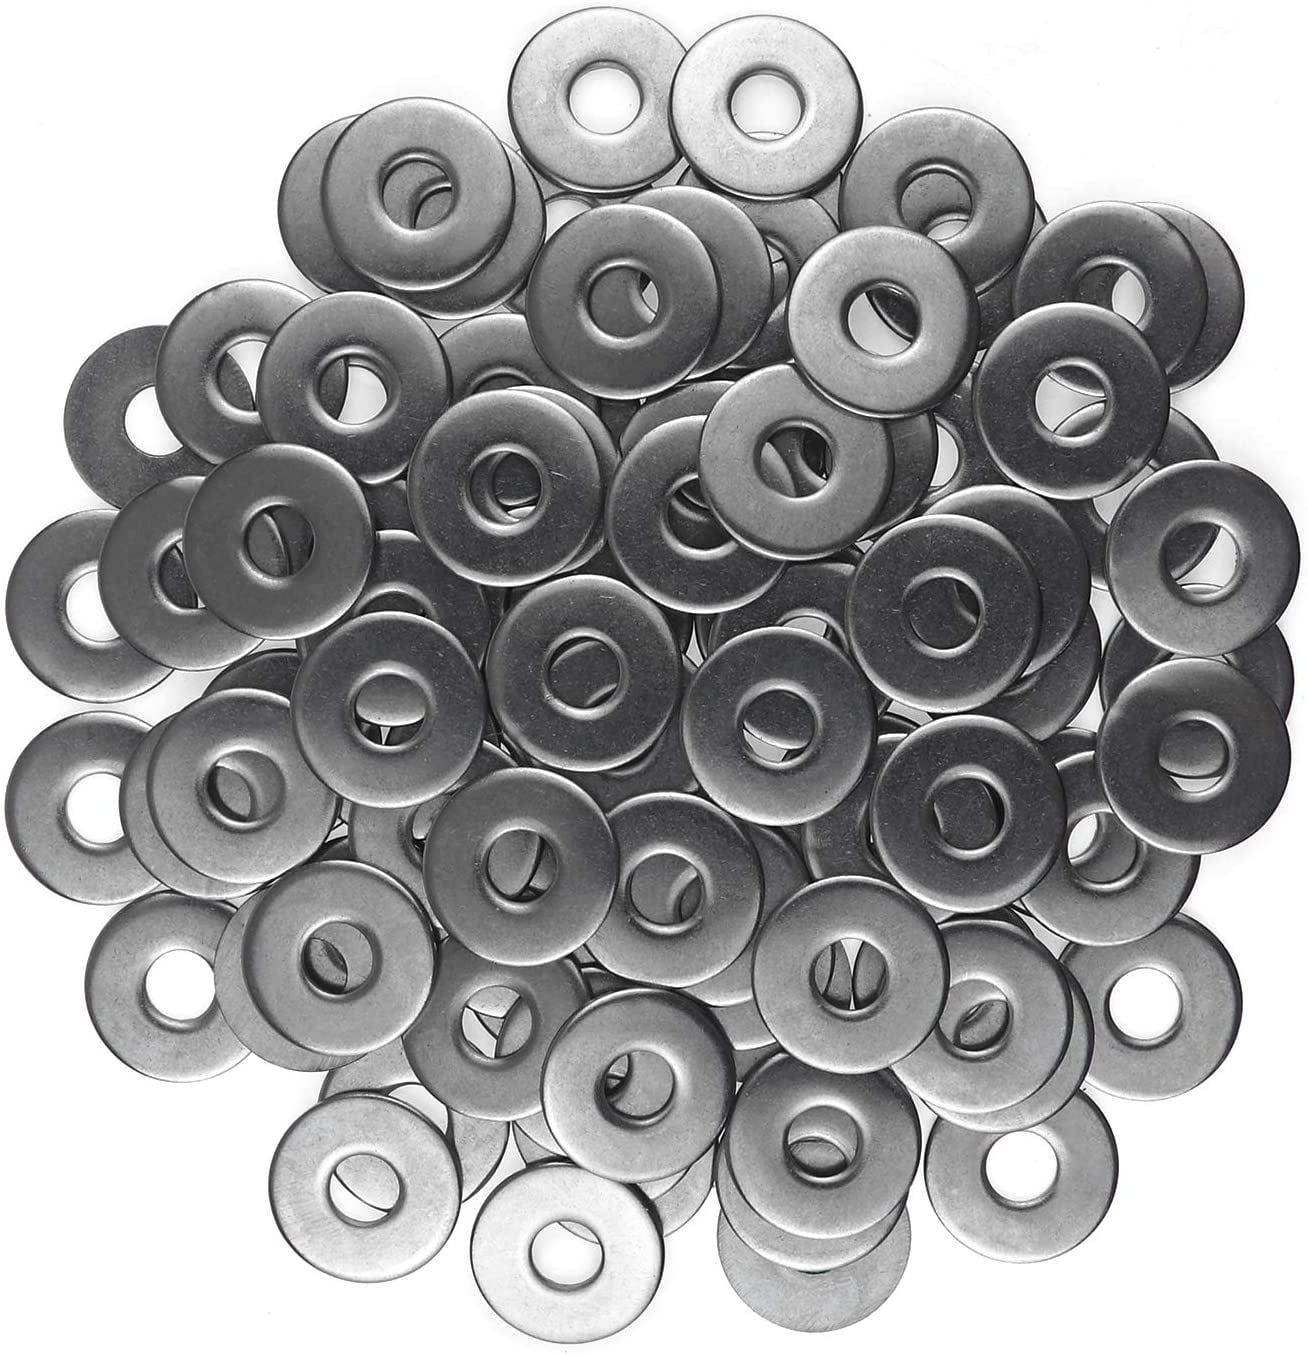 M8 OR 8mm Metric Stainless Steel EXTRA THICK HEAVY DUTY Flat Washers 25 pcs 25 